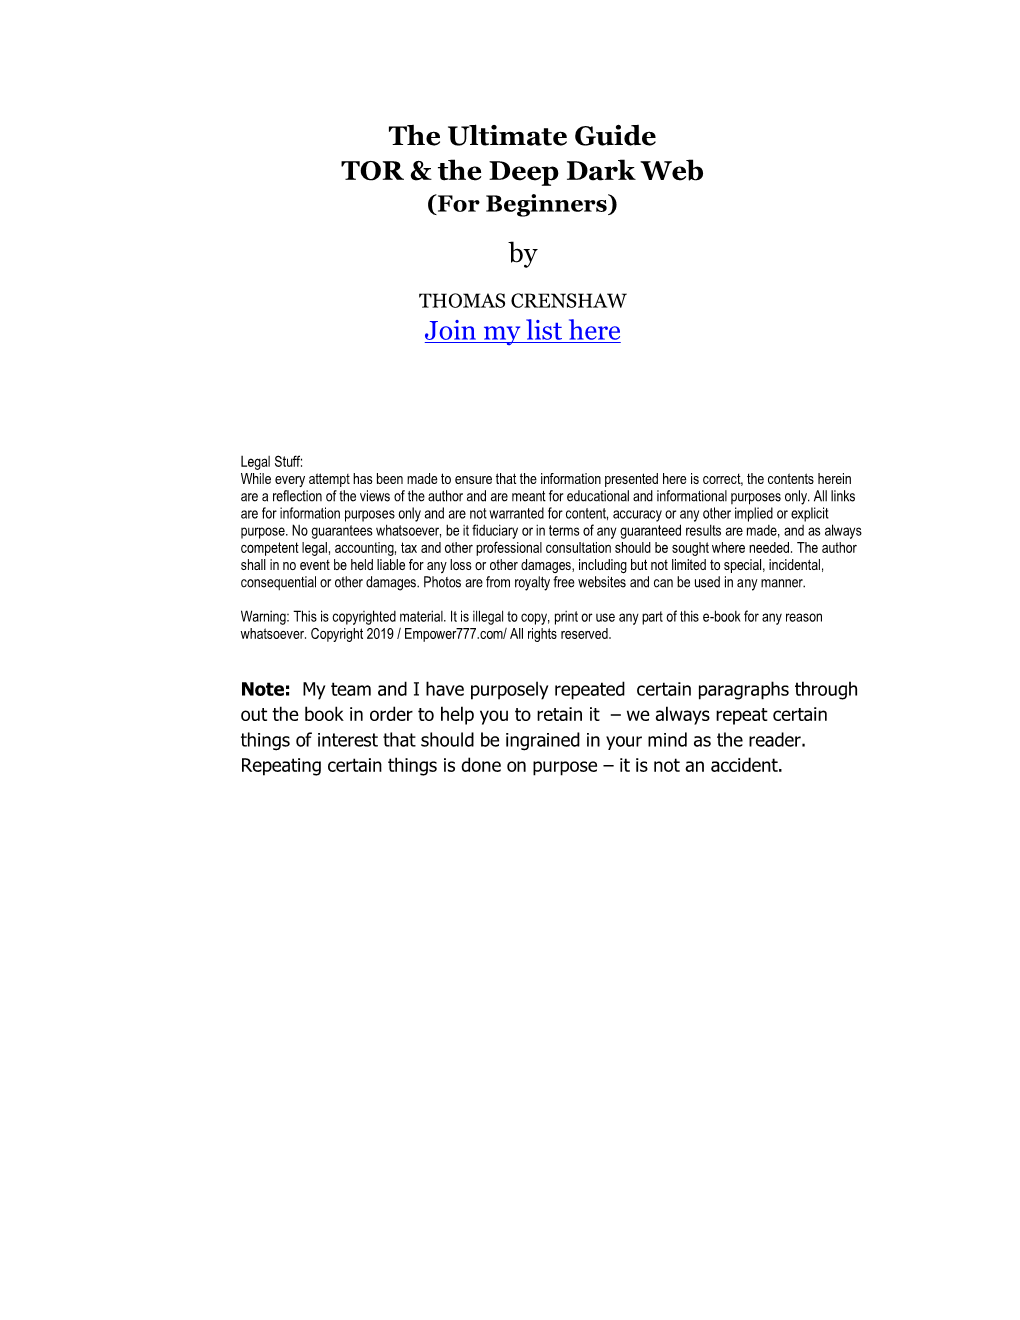 The Ultimate Guide TOR & the Deep Dark Web by Join My List Here